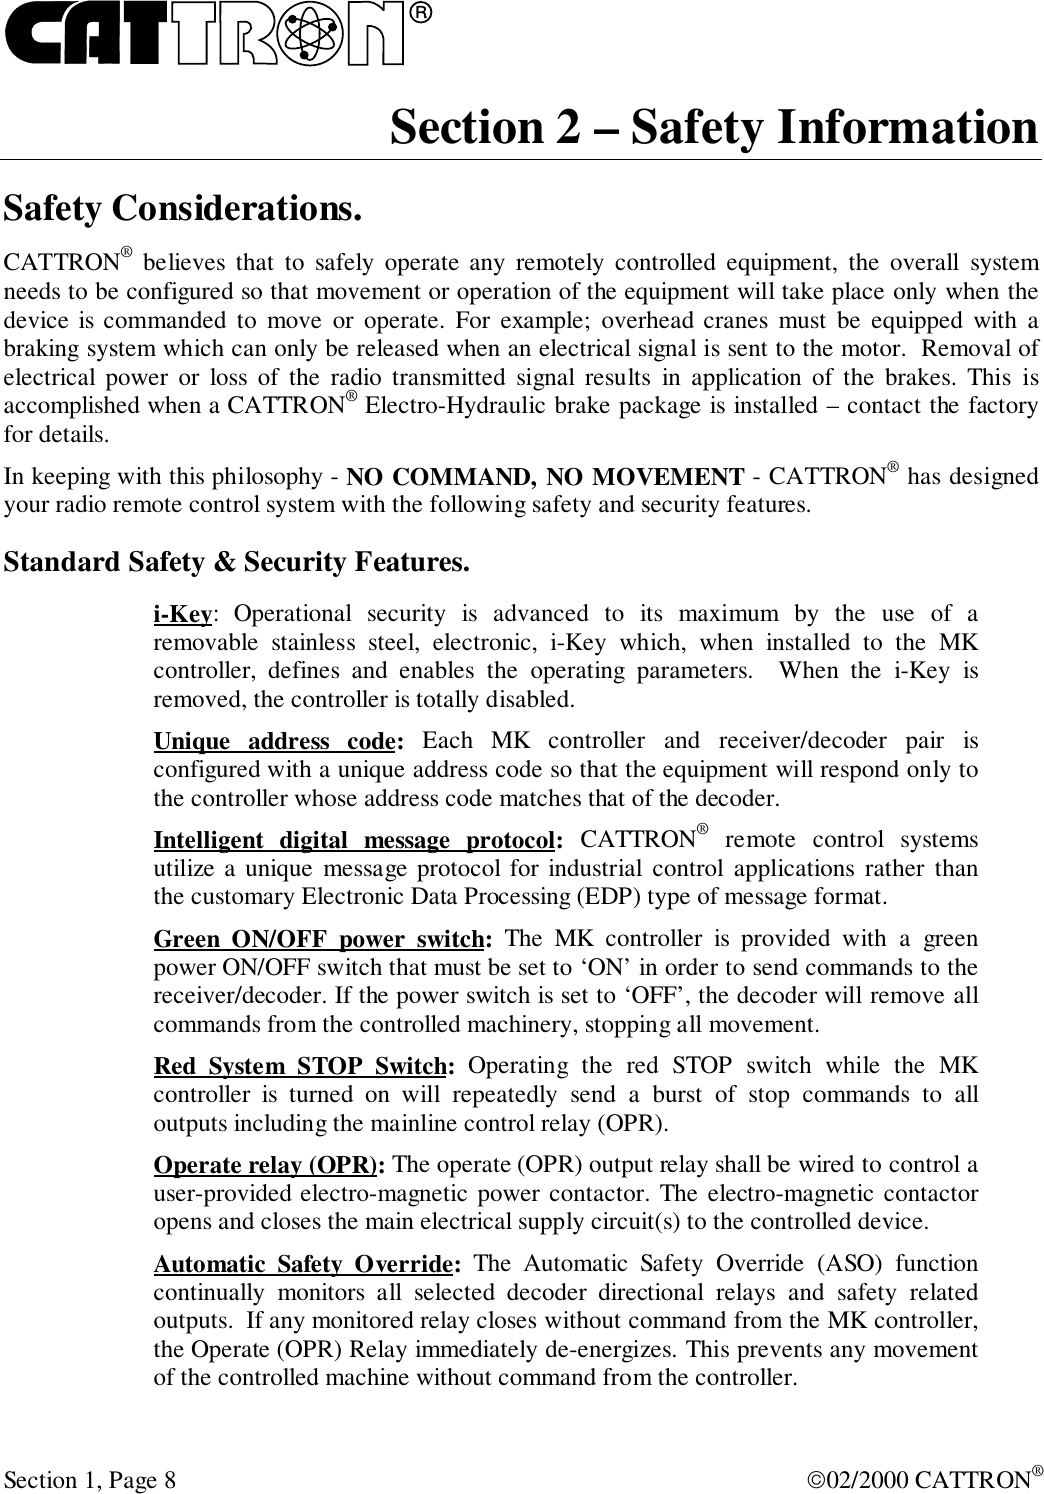 RSection 1, Page 8 02/2000 CATTRON®Section 2 – Safety InformationSafety Considerations.CATTRON® believes that to safely operate any remotely controlled equipment, the overall systemneeds to be configured so that movement or operation of the equipment will take place only when thedevice is commanded to move or operate. For example; overhead cranes must be equipped with abraking system which can only be released when an electrical signal is sent to the motor.  Removal ofelectrical power or loss of the radio transmitted signal results in application of the brakes. This isaccomplished when a CATTRON® Electro-Hydraulic brake package is installed – contact the factoryfor details.In keeping with this philosophy - NO COMMAND, NO MOVEMENT - CATTRON® has designedyour radio remote control system with the following safety and security features.Standard Safety &amp; Security Features.i-Key: Operational security is advanced to its maximum by the use of aremovable stainless steel, electronic, i-Key which, when installed to the MKcontroller, defines and enables the operating parameters.  When the i-Key isremoved, the controller is totally disabled.Unique address code: Each MK controller and receiver/decoder pair isconfigured with a unique address code so that the equipment will respond only tothe controller whose address code matches that of the decoder.Intelligent digital message protocol: CATTRON® remote control systemsutilize a unique message protocol for industrial control applications rather thanthe customary Electronic Data Processing (EDP) type of message format.Green ON/OFF power switch: The MK controller is provided with a greenpower ON/OFF switch that must be set to ‘ON’ in order to send commands to thereceiver/decoder. If the power switch is set to ‘OFF’, the decoder will remove allcommands from the controlled machinery, stopping all movement.Red System STOP Switch: Operating the red STOP switch while the MKcontroller is turned on will repeatedly send a burst of stop commands to alloutputs including the mainline control relay (OPR).Operate relay (OPR): The operate (OPR) output relay shall be wired to control auser-provided electro-magnetic power contactor. The electro-magnetic contactoropens and closes the main electrical supply circuit(s) to the controlled device.Automatic Safety Override: The Automatic Safety Override (ASO) functioncontinually monitors all selected decoder directional relays and safety relatedoutputs.  If any monitored relay closes without command from the MK controller,the Operate (OPR) Relay immediately de-energizes. This prevents any movementof the controlled machine without command from the controller.